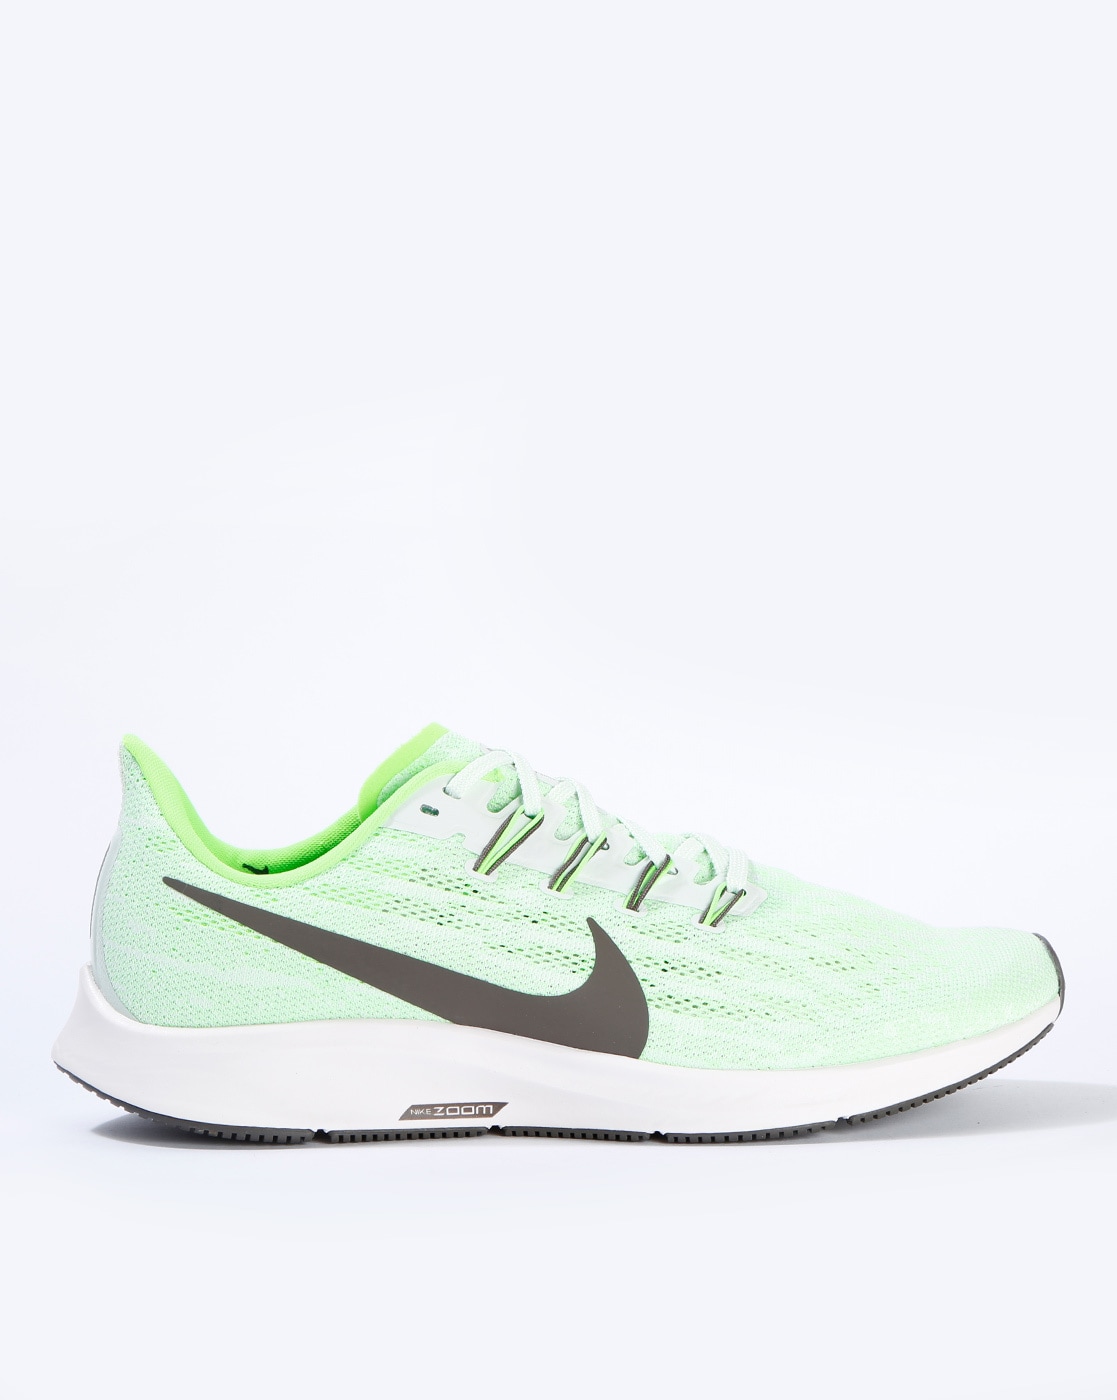 nike shoes online india discount online -